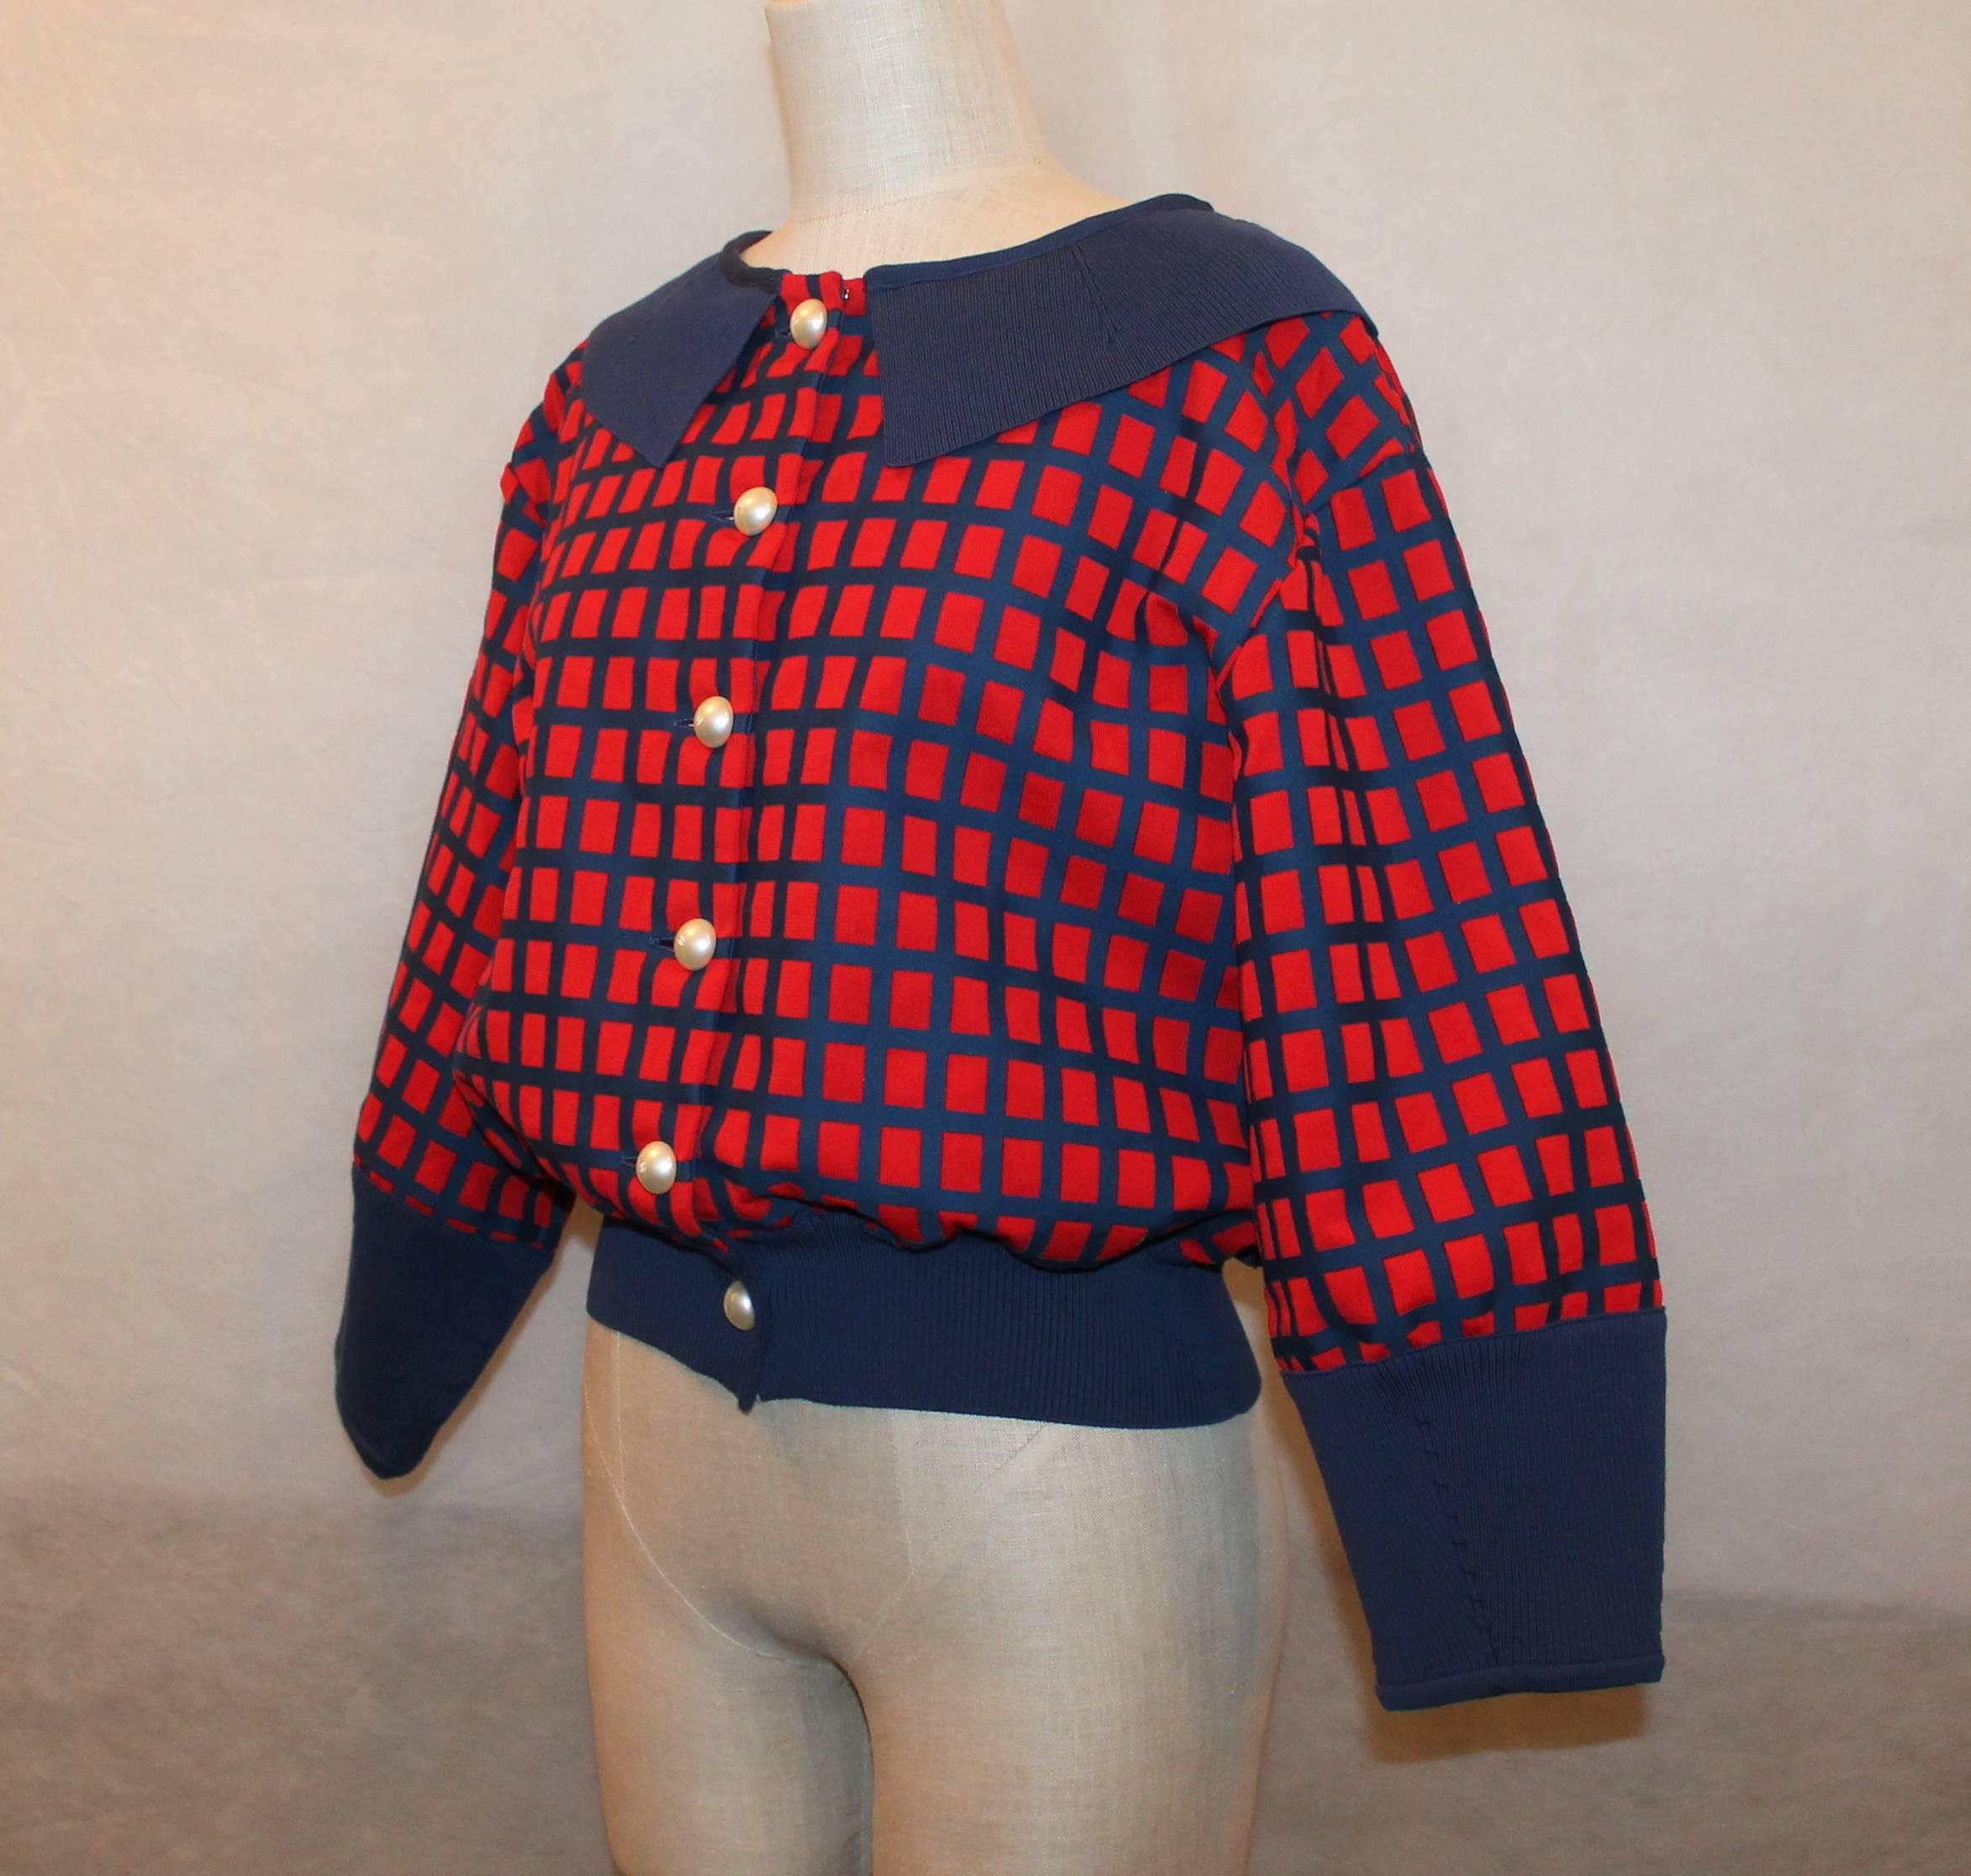 Chanel Red and Blue Windowpane Print Jacket w/ Pearl Buttons - 42 This jacket is 100% cotton and is in excellent condition. It also has a blue trim on the collar and cuffs of the sleeves. The pearl buttons have the classic Chanel 